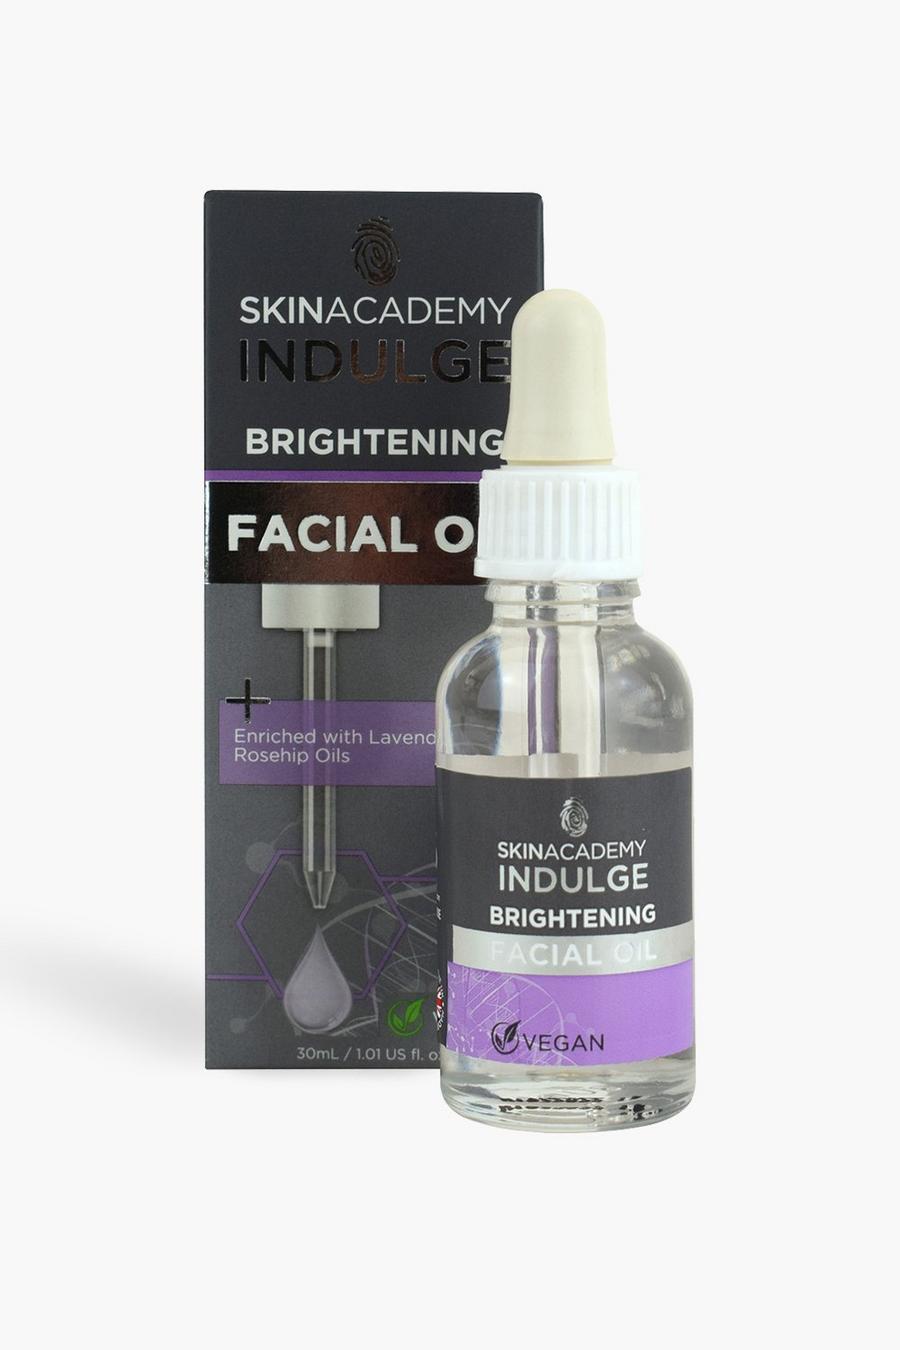 Clear Skin Academy Indulge Facial Oil - Brightening